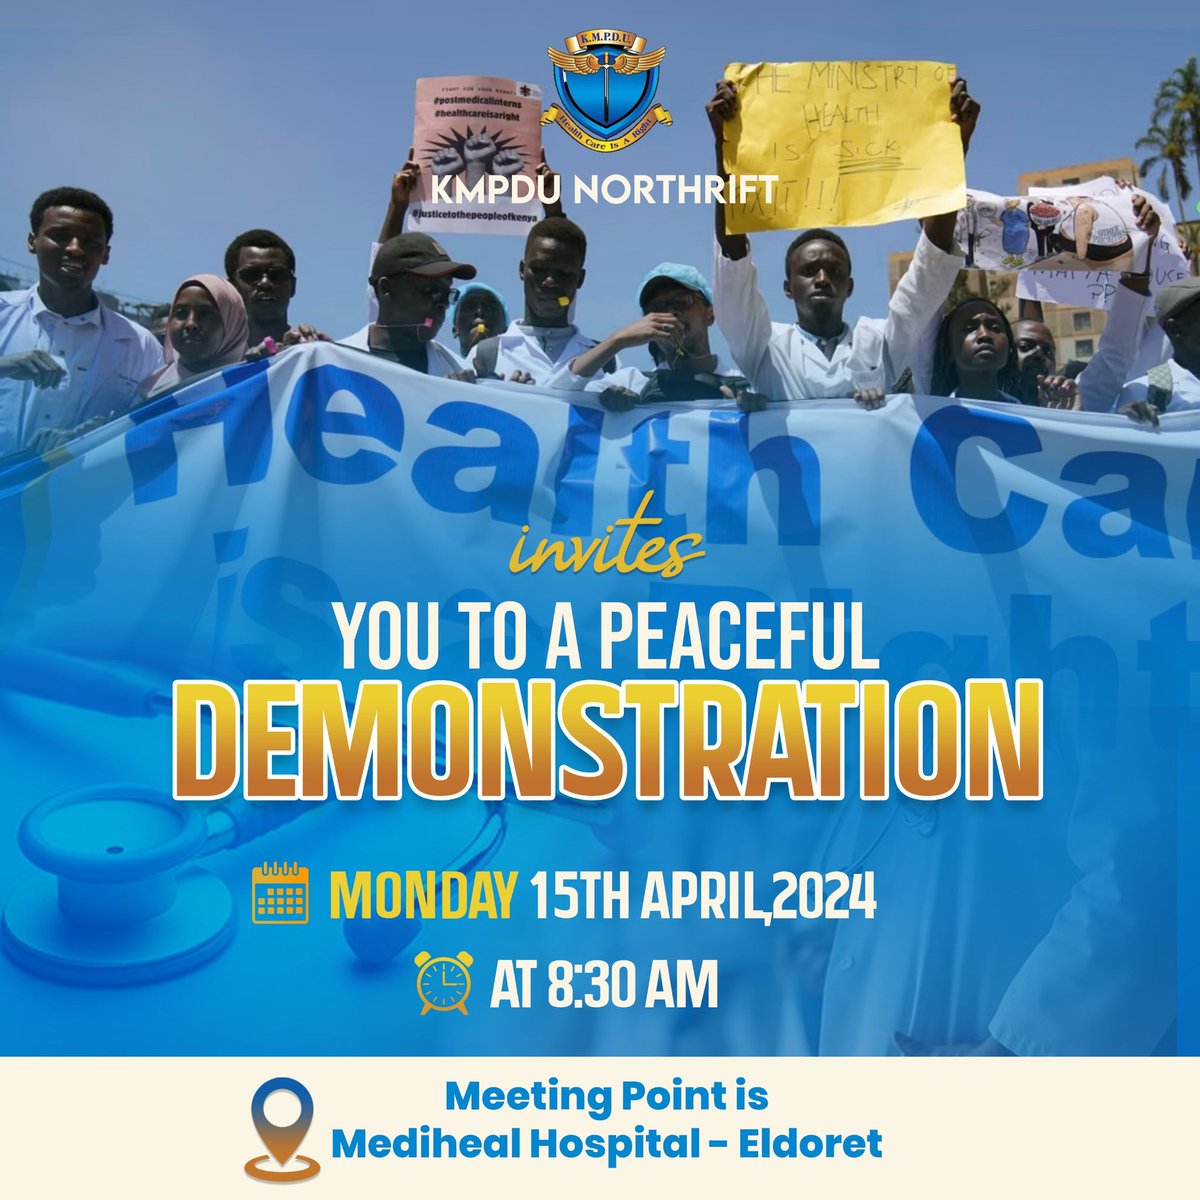 Join the KMPDU North Rift Branch , on April 15th 2024 at 8:30 am for a peaceful demonstration at Mediheal Hospital . We advocate for our rights, full implementation of the CBA, and improvements in the healthcare system. #DoctorsStrikeKE #Implement2017CBA #QualityHealthcare